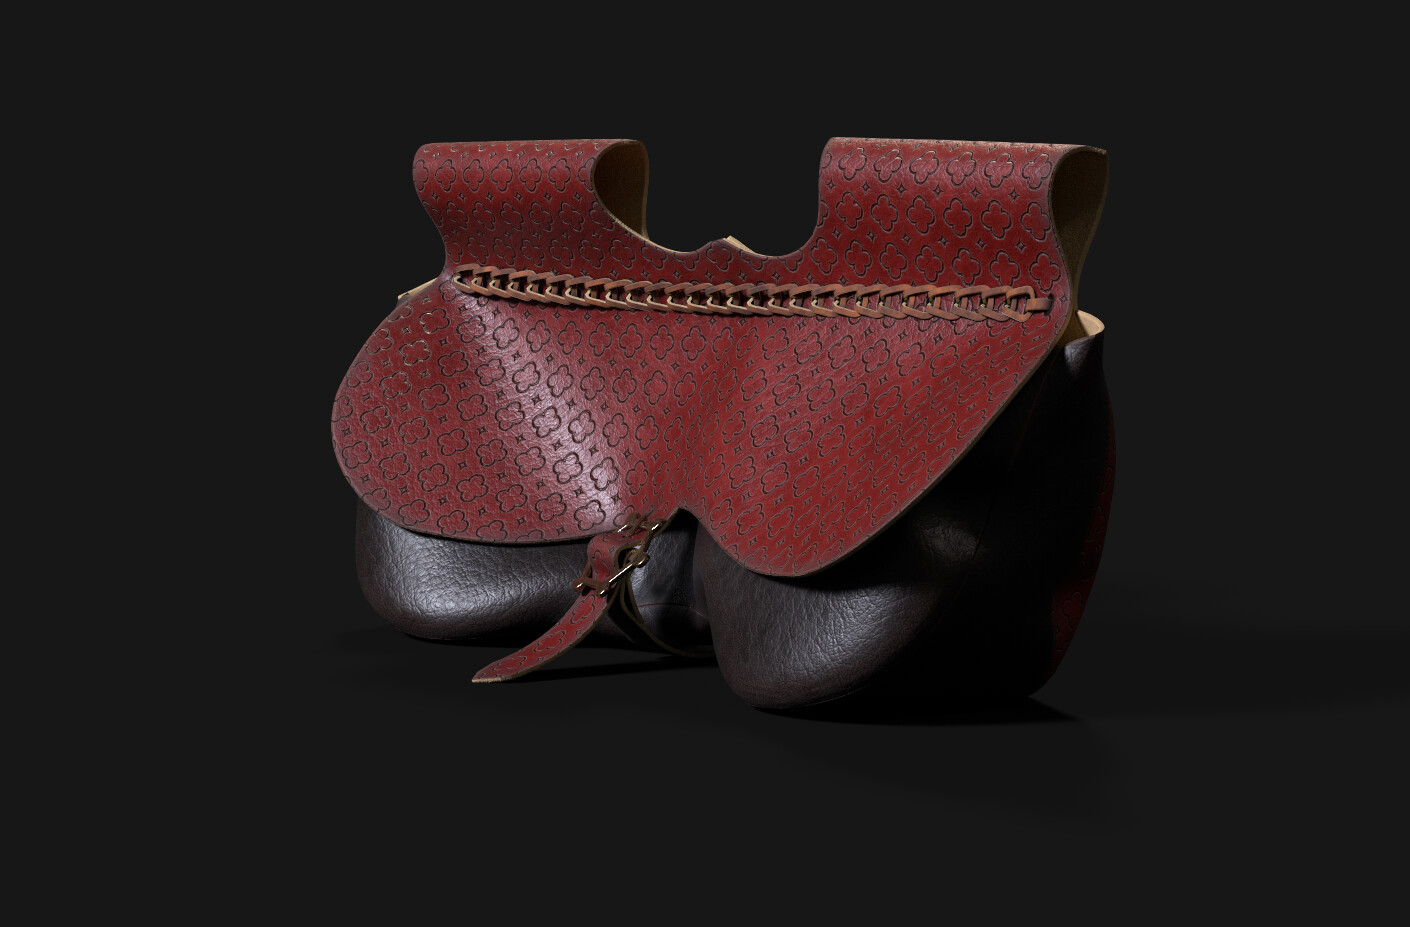 ArtStation - Medieval old leather pouch